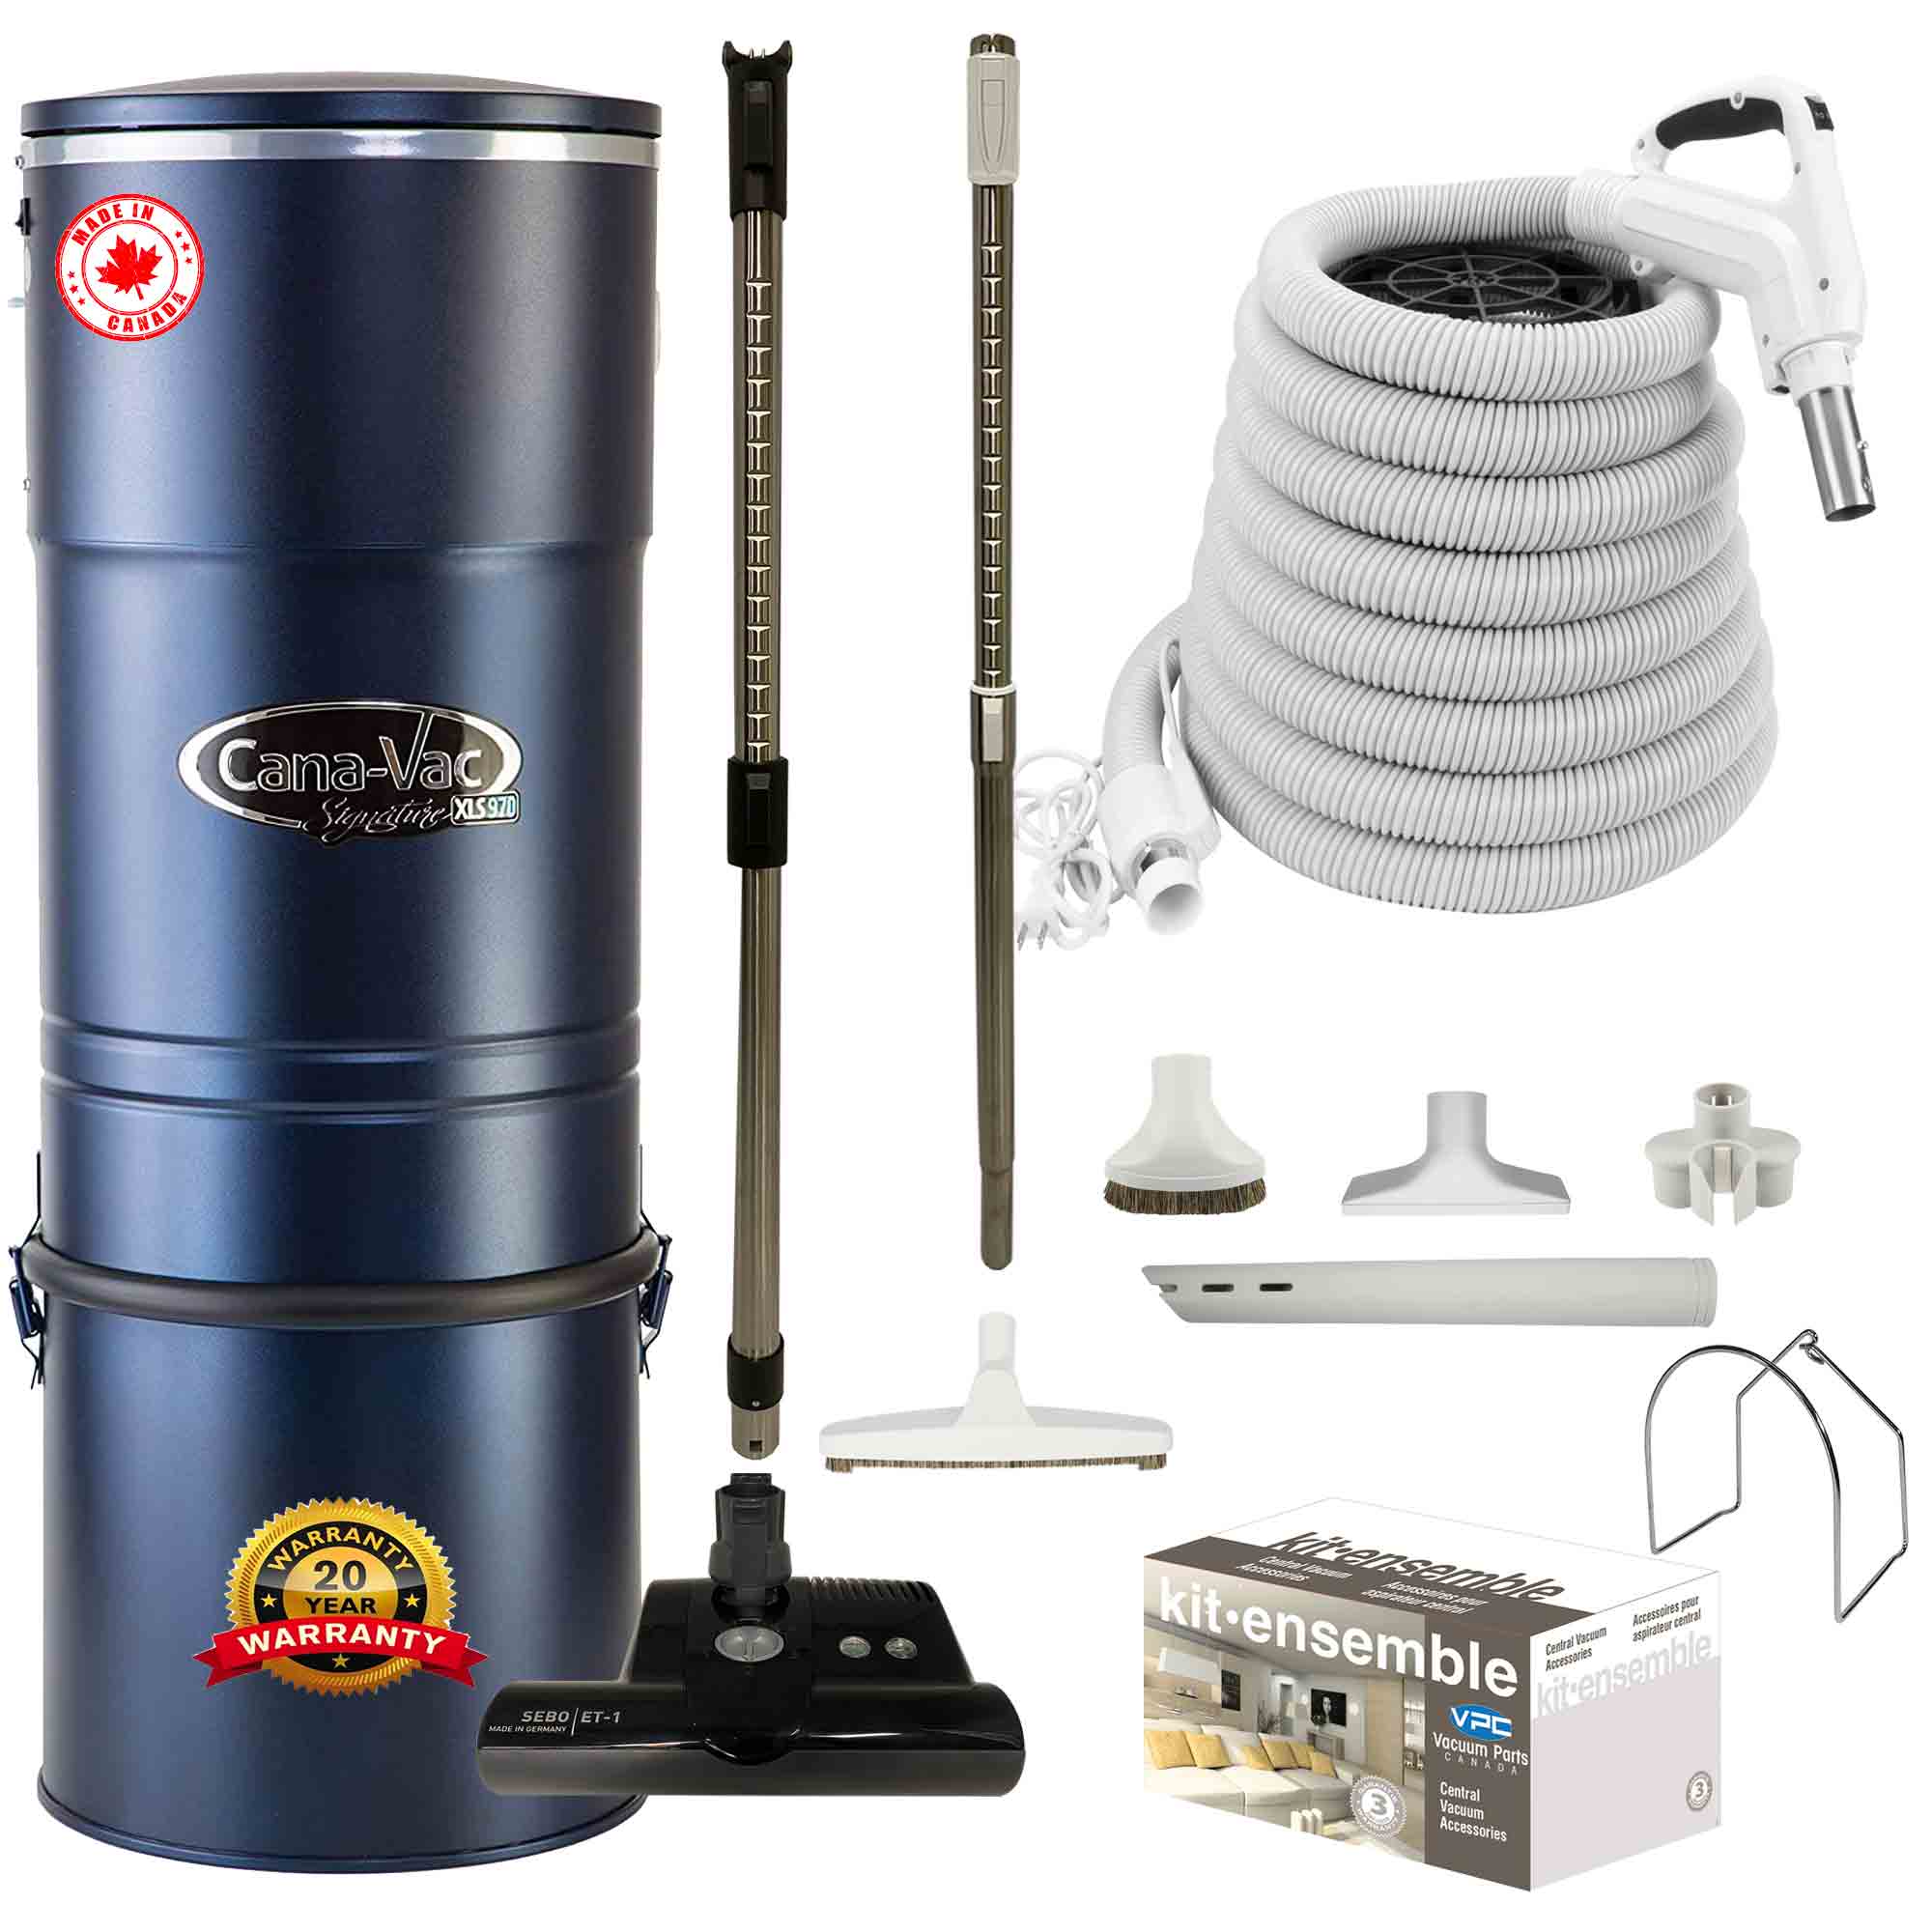 Cana-Vac XLS990 Central Vacuum with SEBO (Black) Powerhead and Premium Electric Package (White)